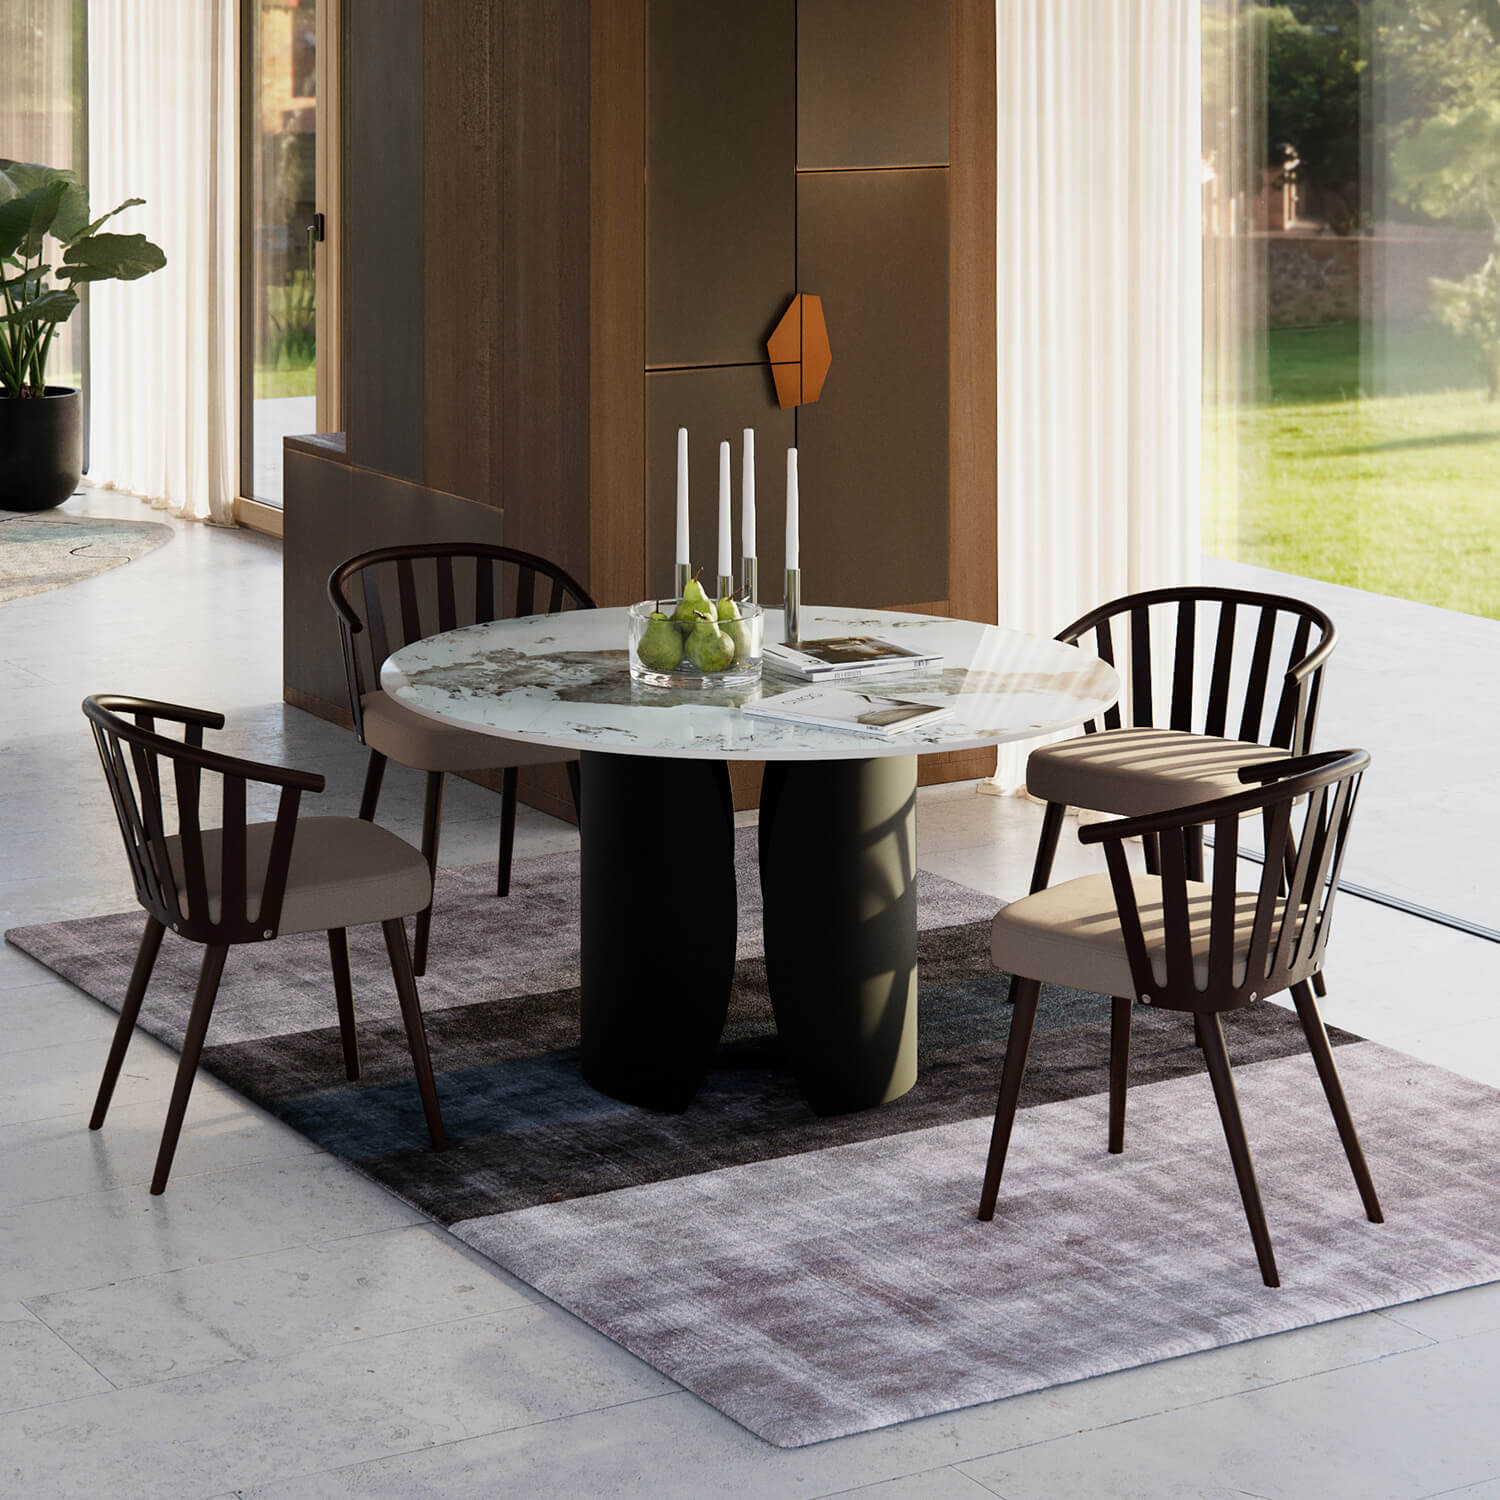 Ceres dining chair